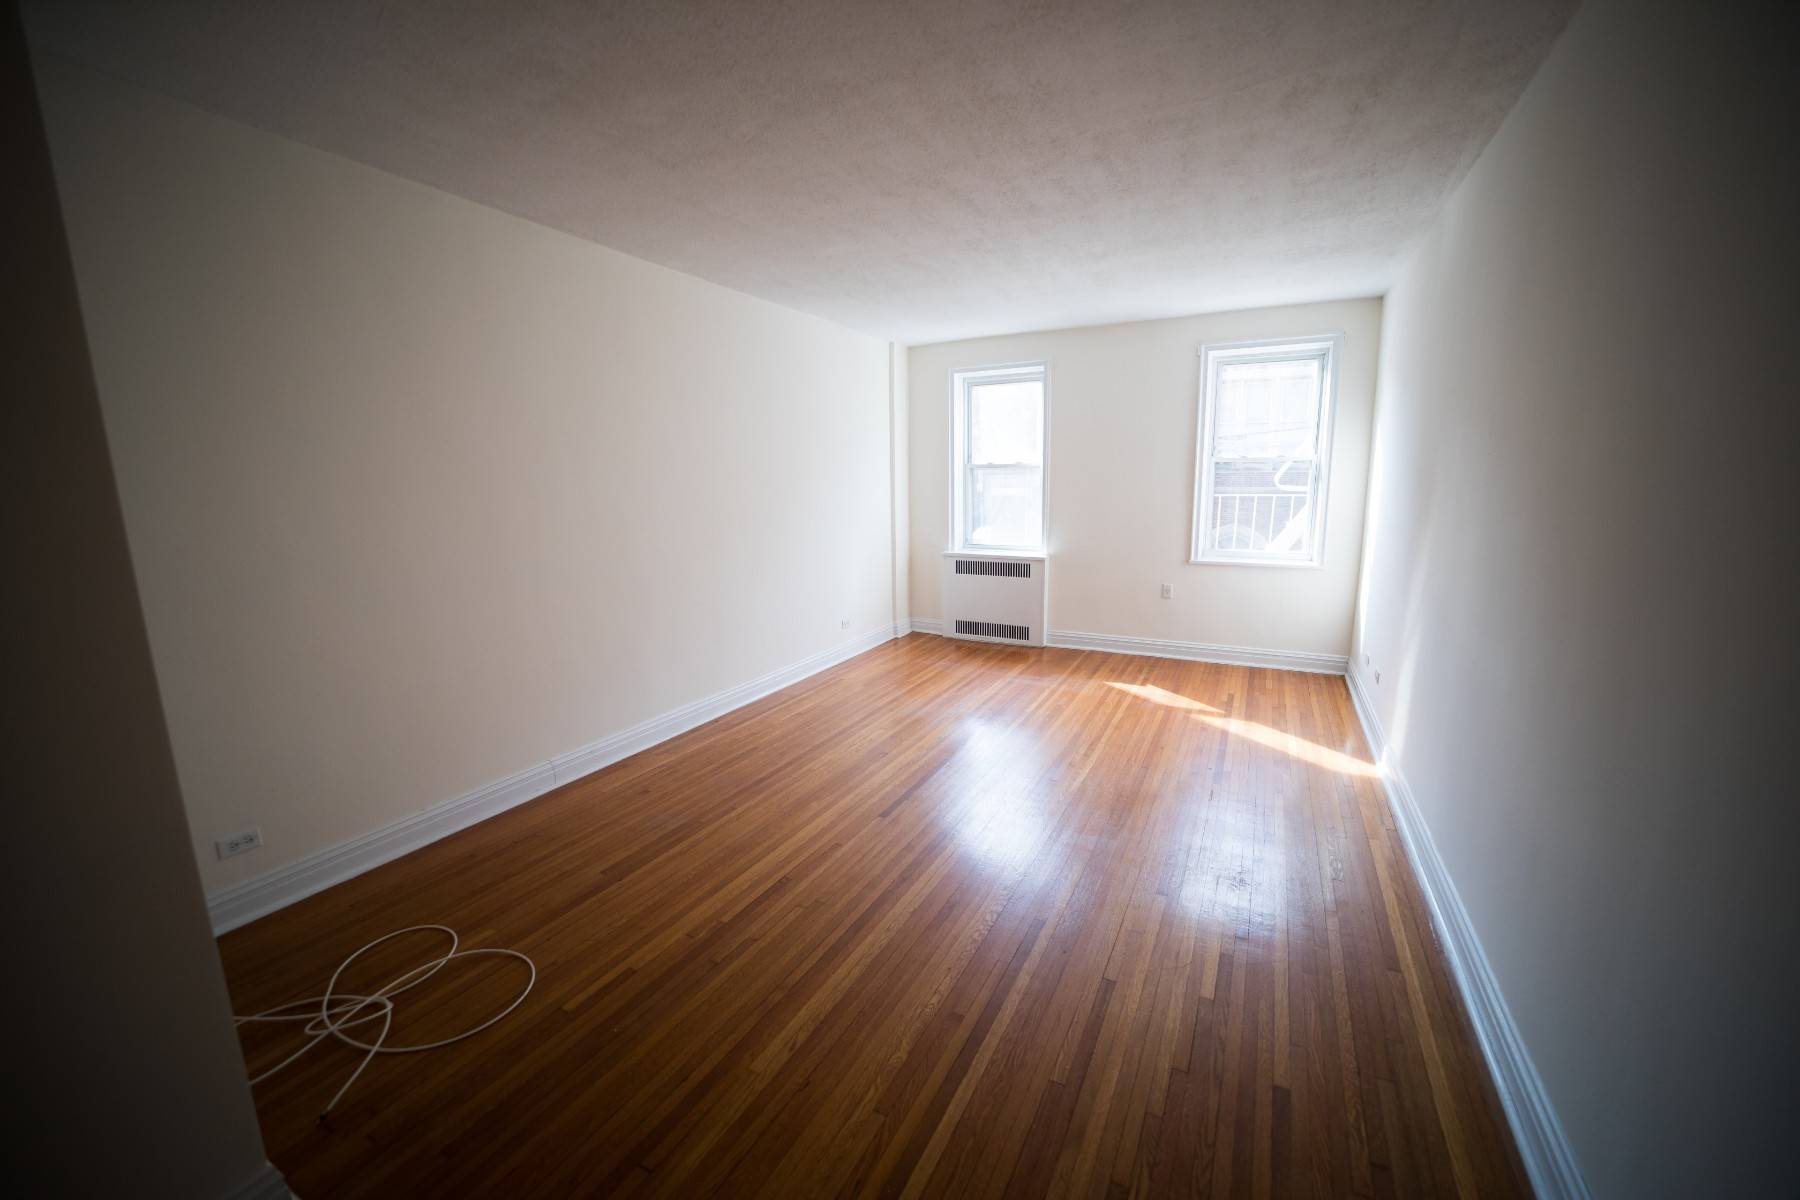 This apartment is a Lovely spacious 2 bedroom.